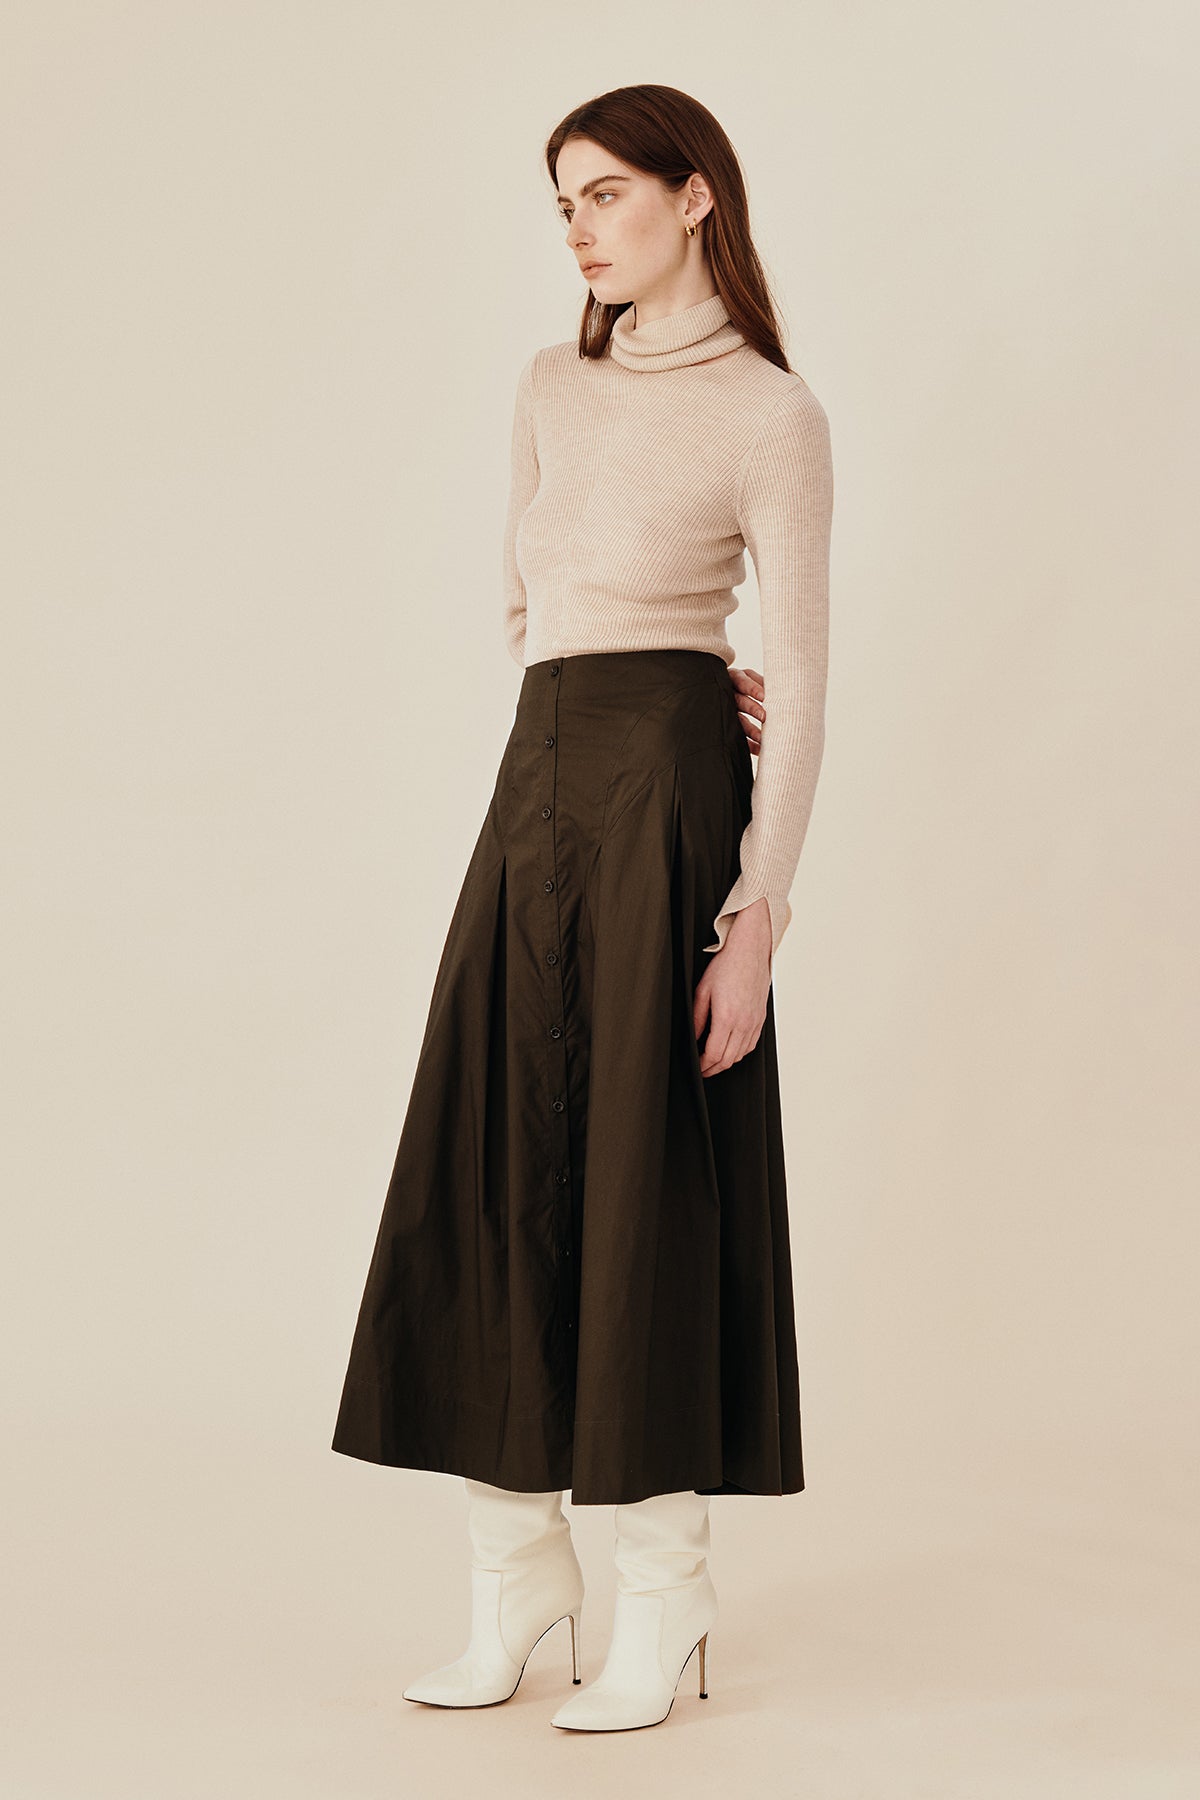 Model wearing Australian fashion designer GINGER & SMARTS midi Candor Skirt crafted in soft organic cotton featuring flattering panels on the hip with deep tucks that create a luxe wide hemline. Corozo buttons adorn the front opening. Worn with the women's Dimension Turtleneck Knit in oatmeal.